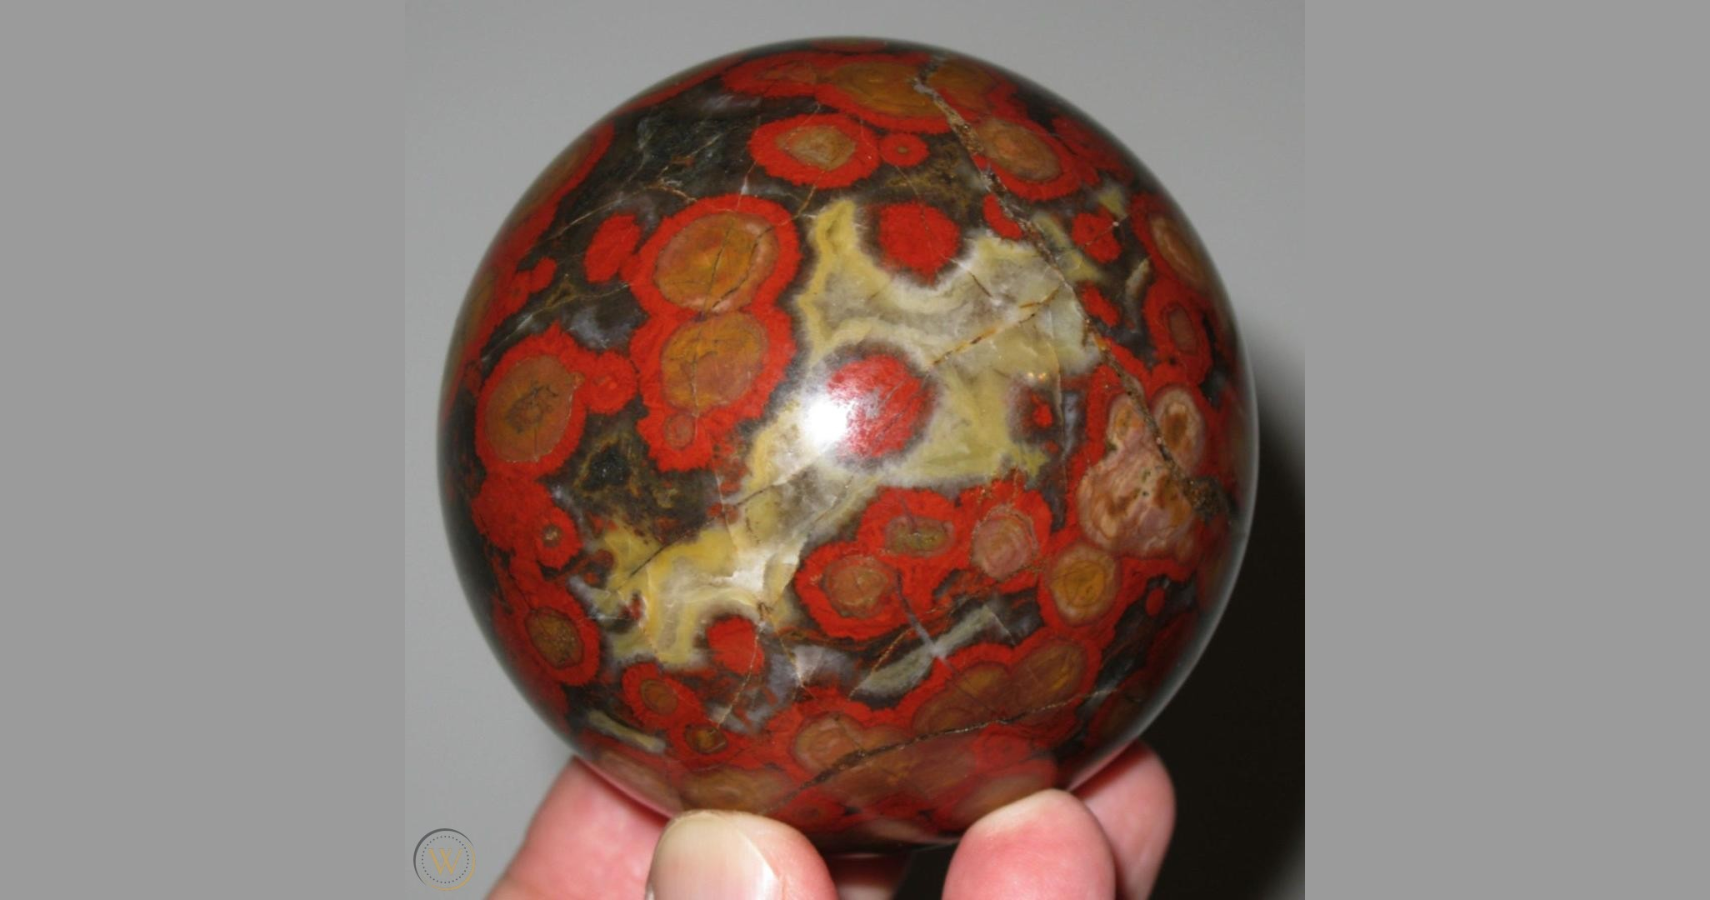 Morgan Hill Poppy Jasper that appears to have many eyes